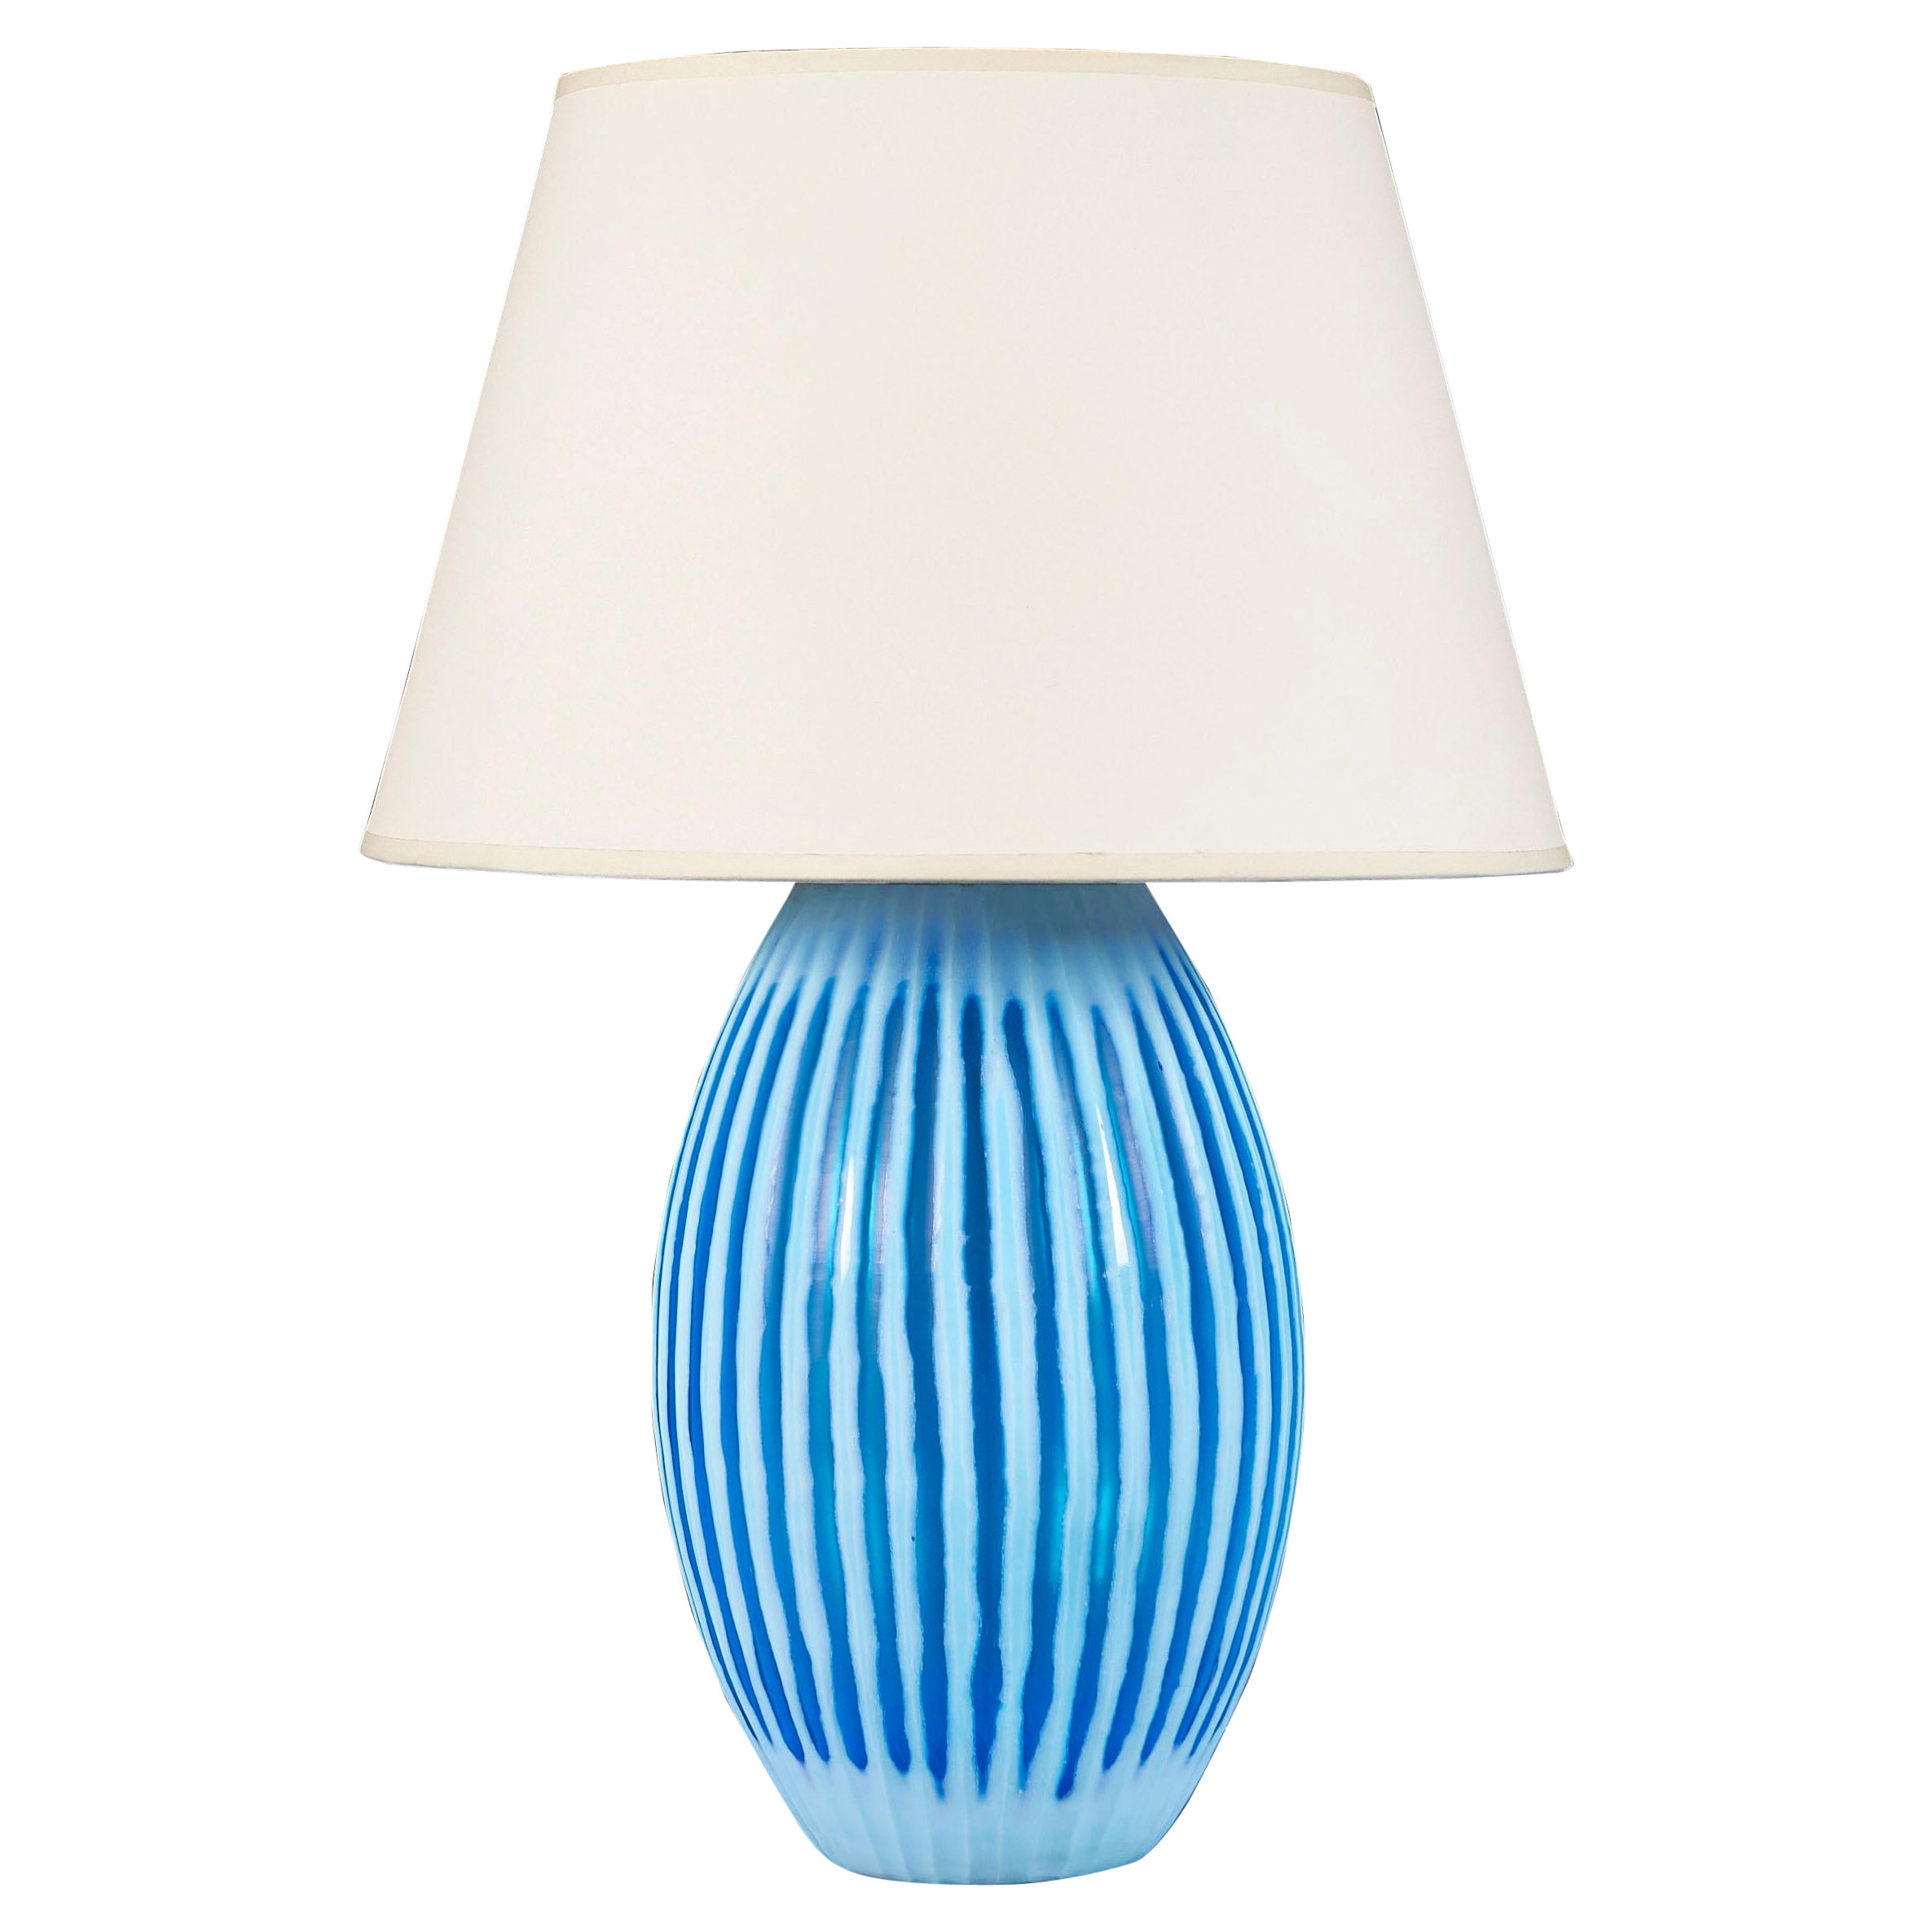 A large blue gadrooned murano lamp